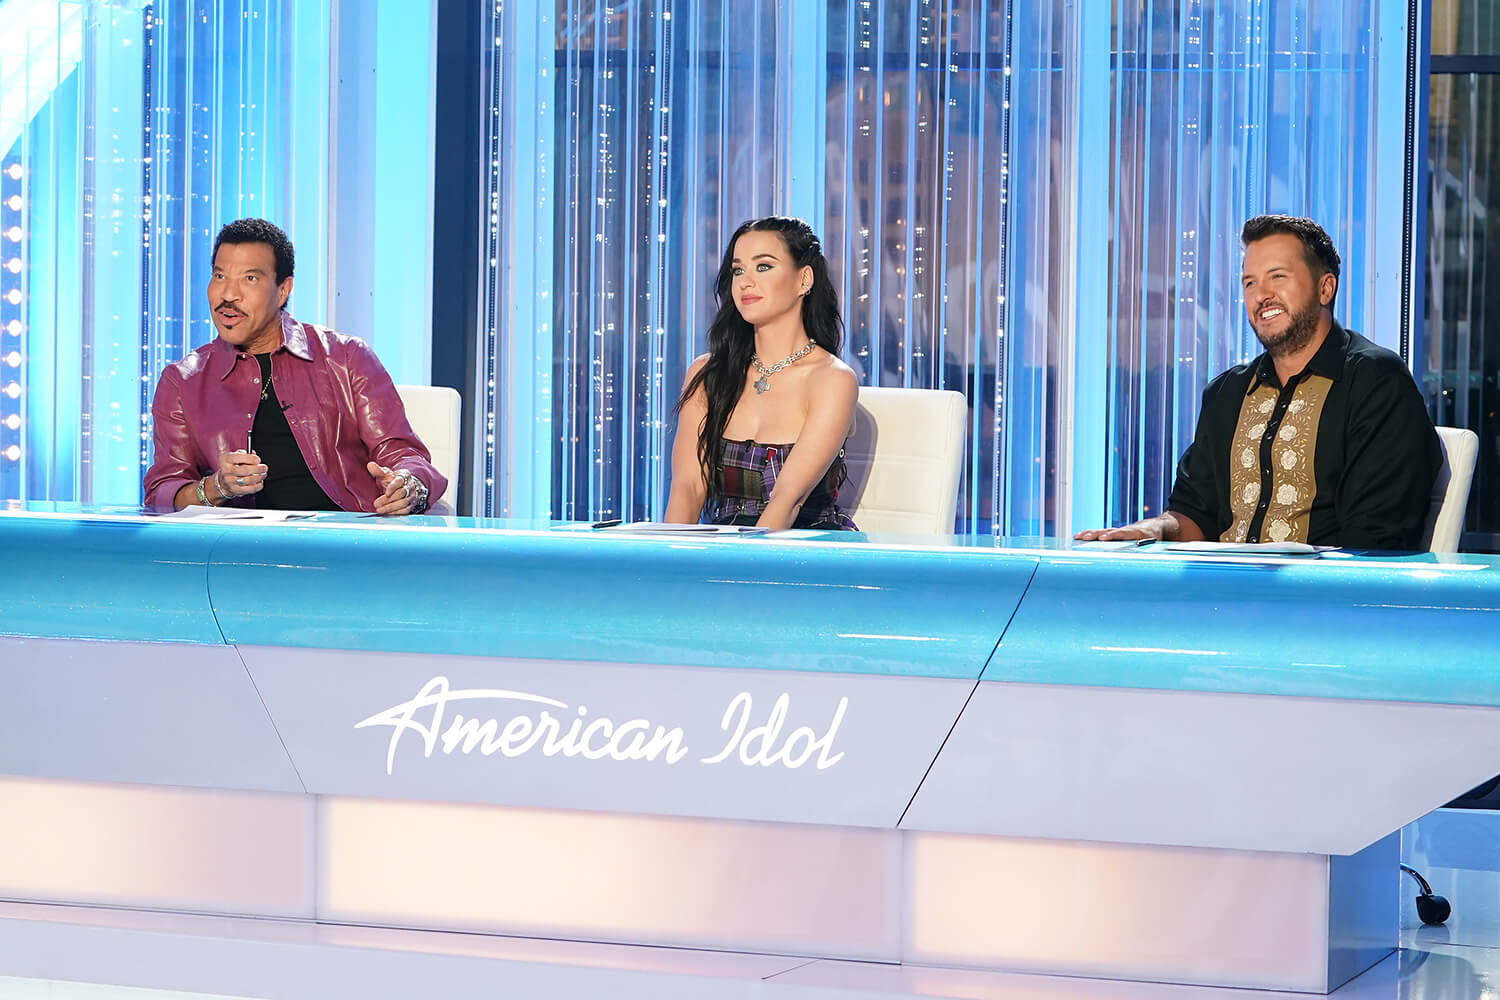 ‘American Idol’: Katy Perry Tearfully Calls for Change After Hearing School Shooting Survivor’s Story — ‘Our Country Has Failed Us’